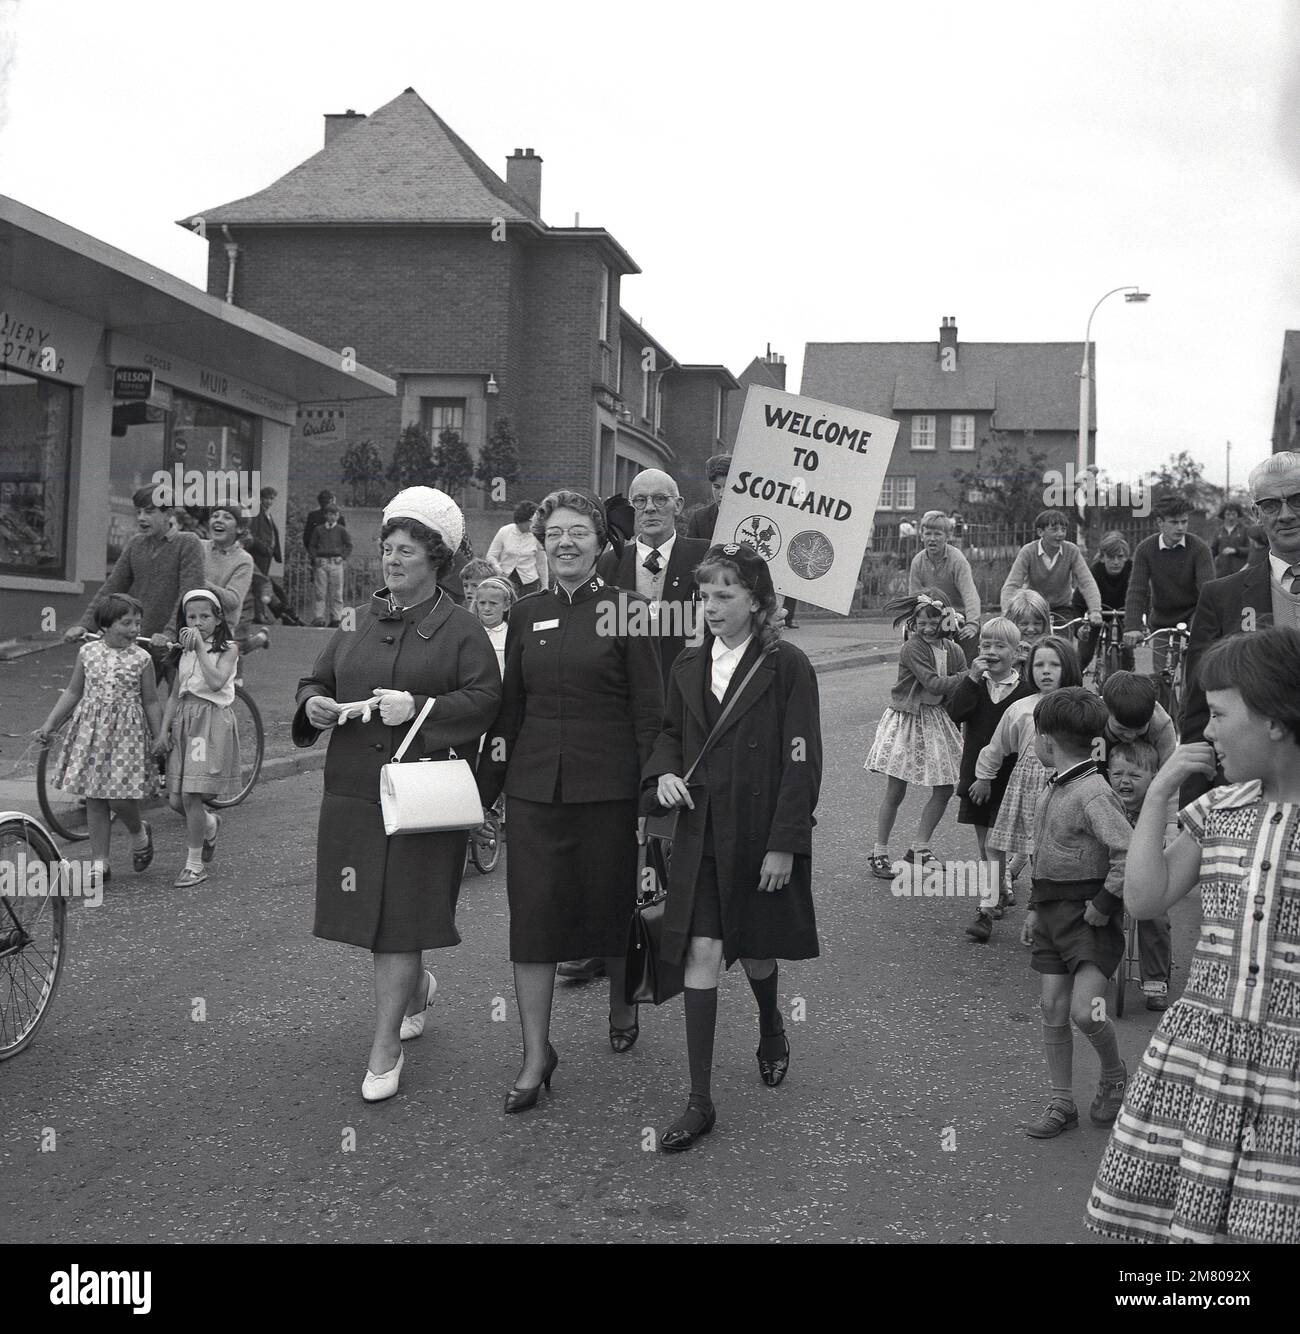 1960s, historical, excited children in the street, as a lady from the Salvation Army in Canada pays a vistor to the twon/village, Fife, Scotland, UK. Man carries a placard, saying 'Welcome to Scotland', Maple leaf and thistles on it Stock Photo